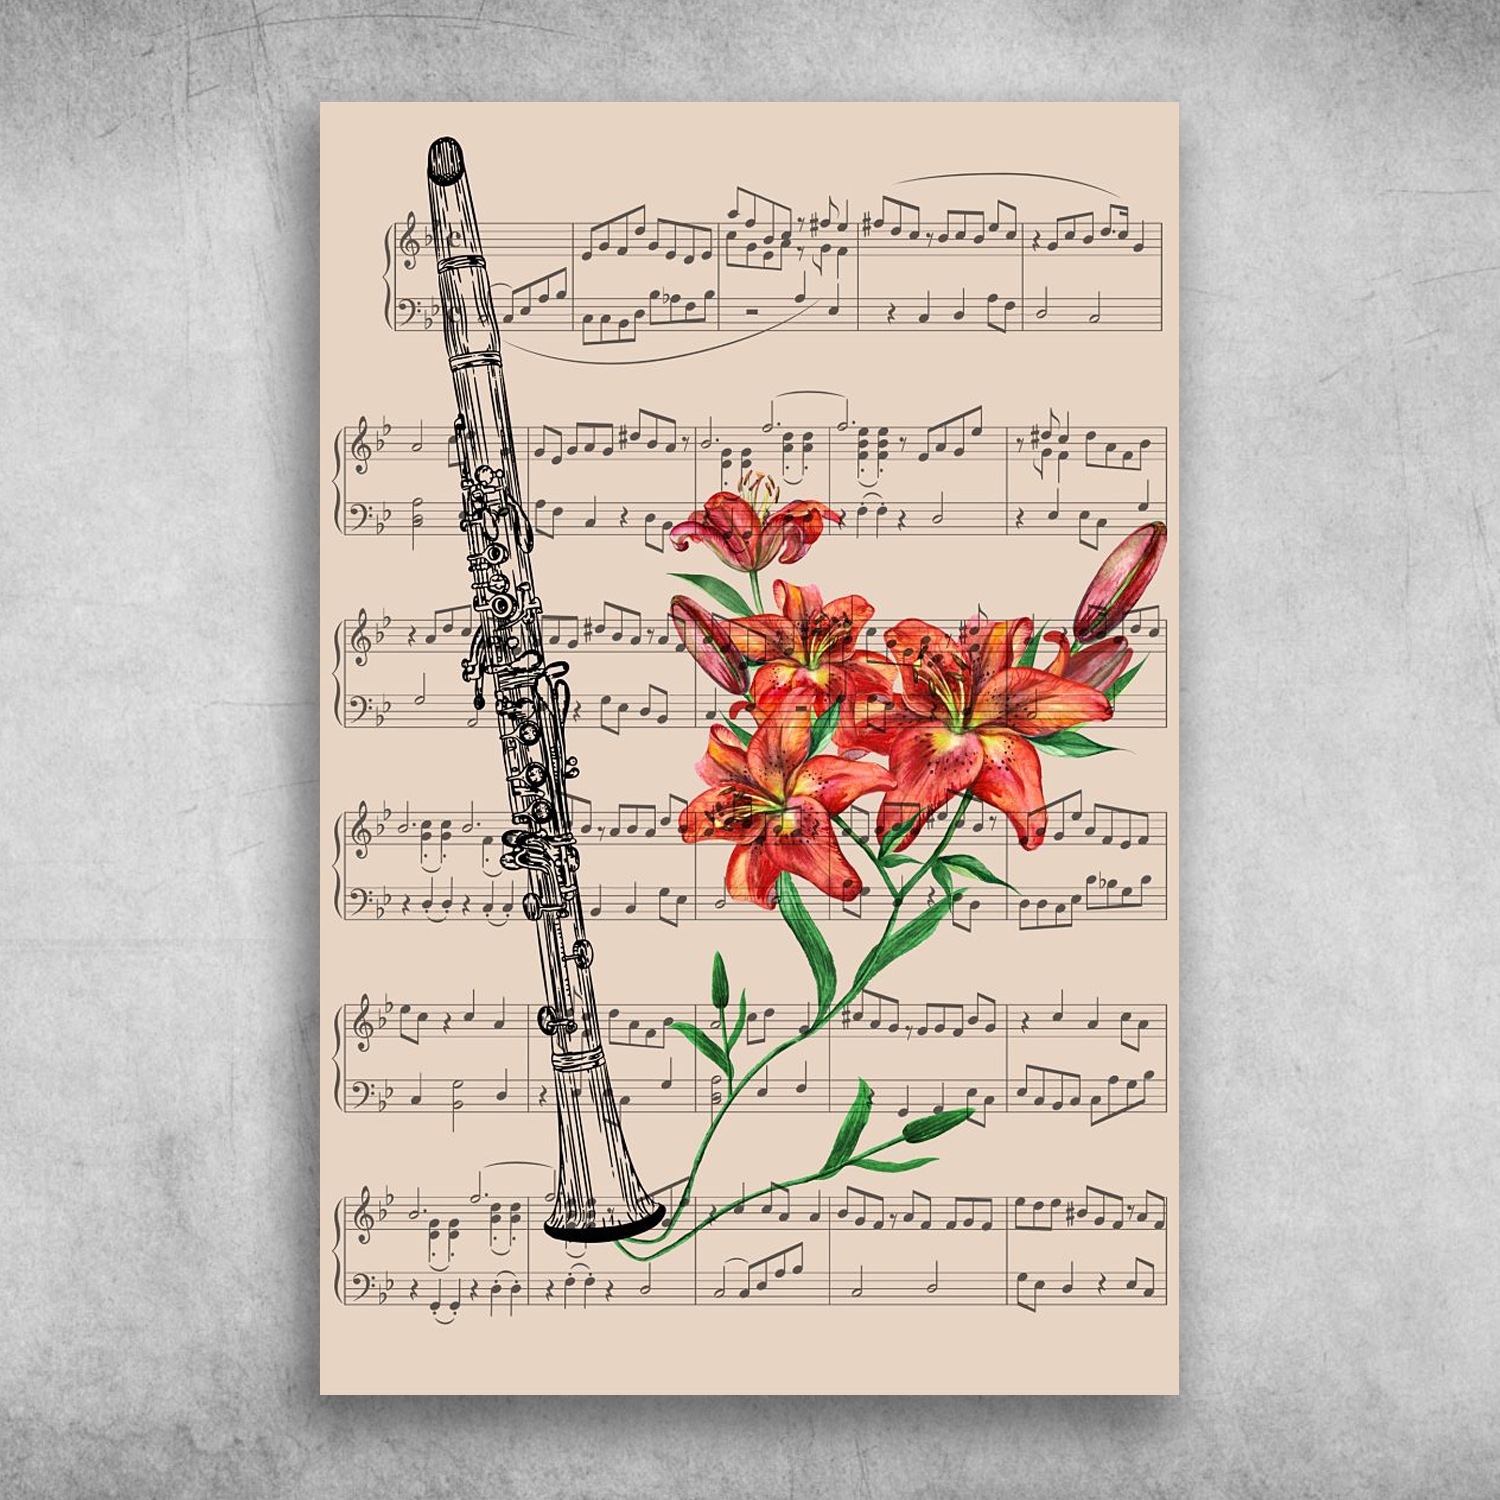 Clarinet Musical Instrument Lily Flower On A Sheet Music